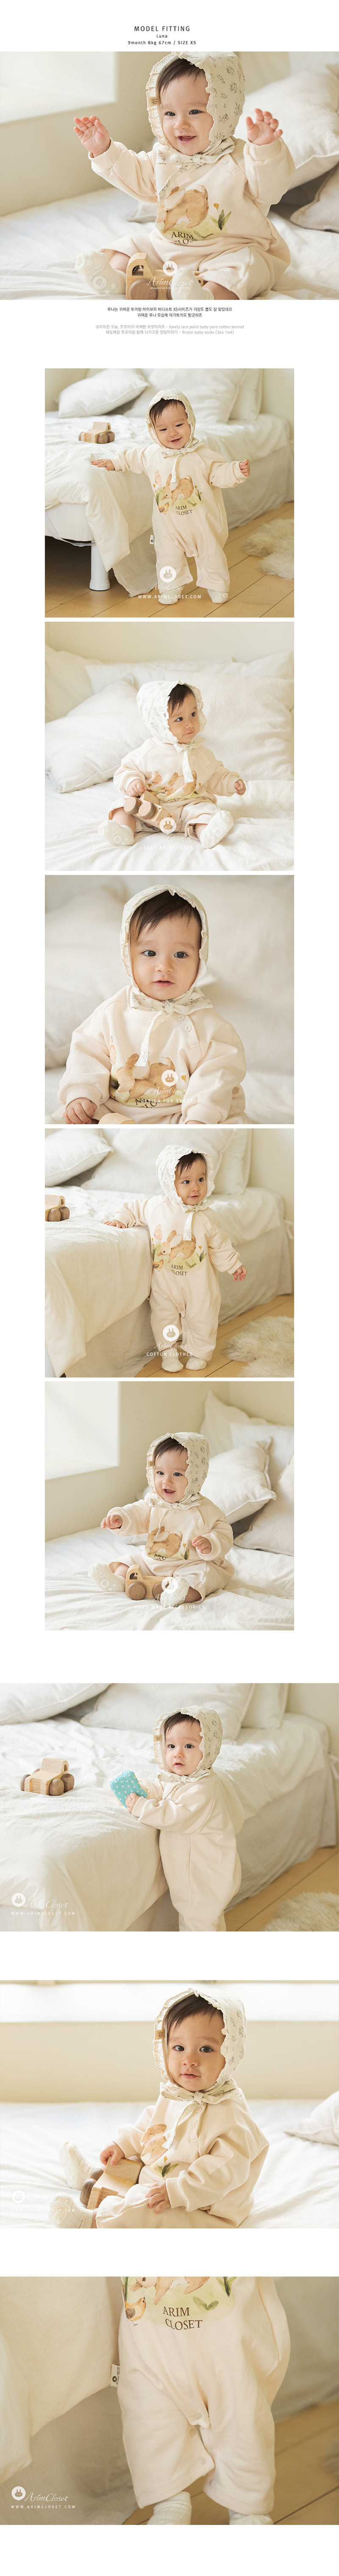 Arim Closet - Korean Baby Fashion - #babyfever - Have a Good Time With A rabbit and a squirrel - 2